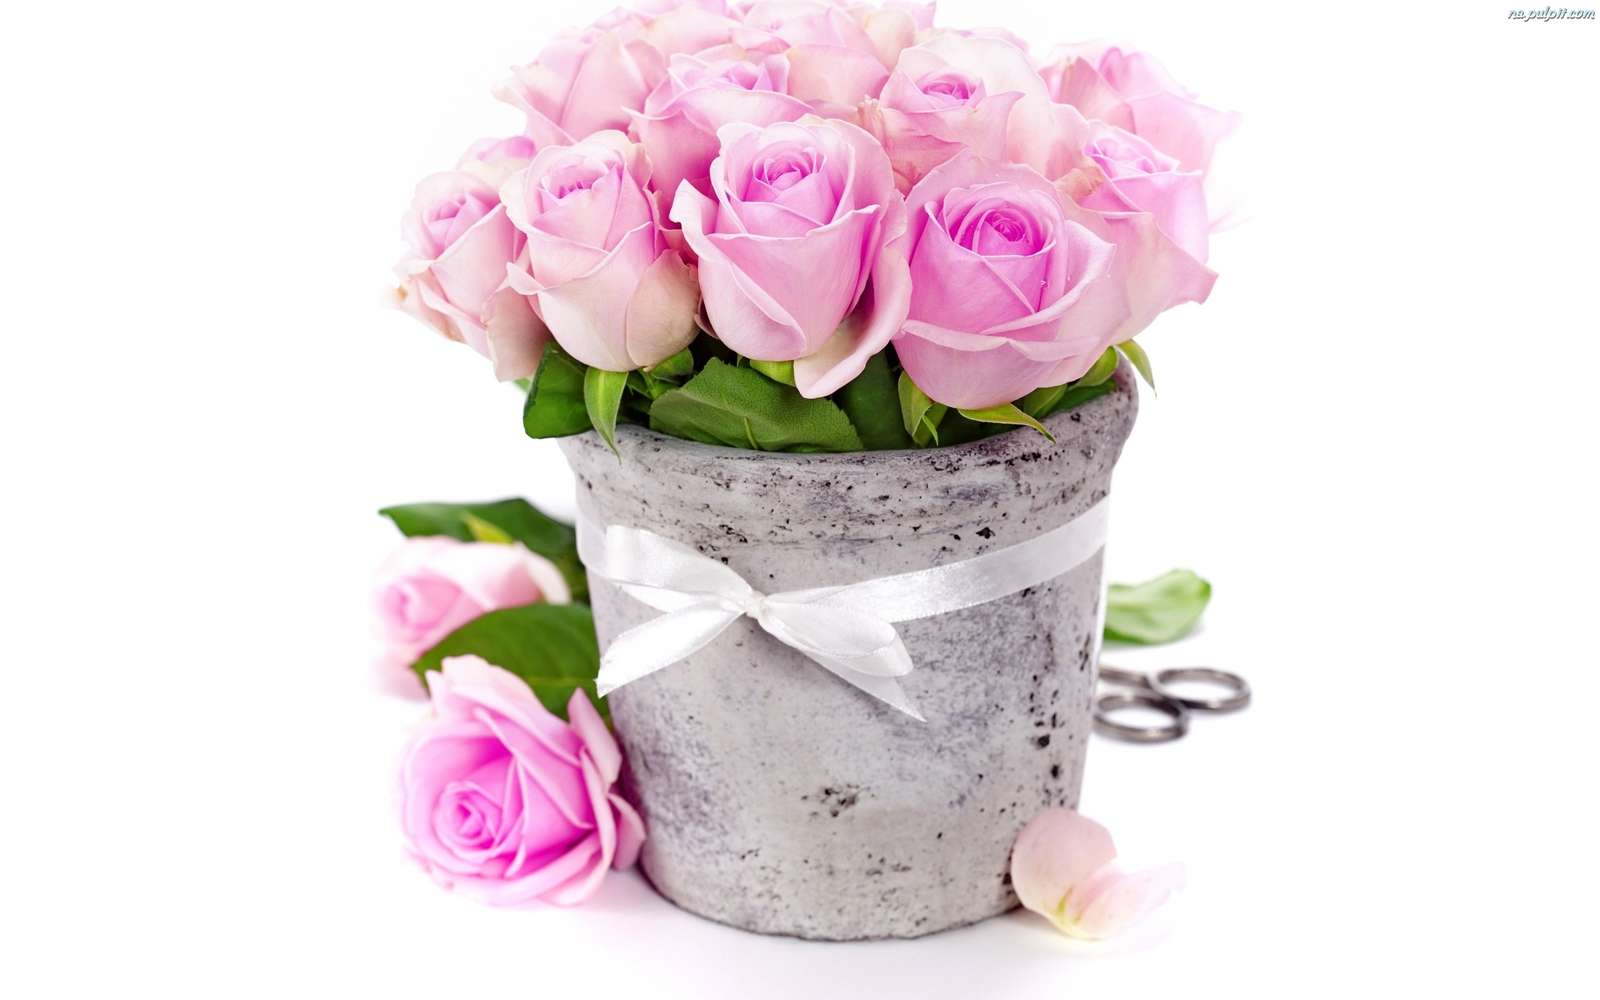 Flowers in a vase jigsaw puzzle online